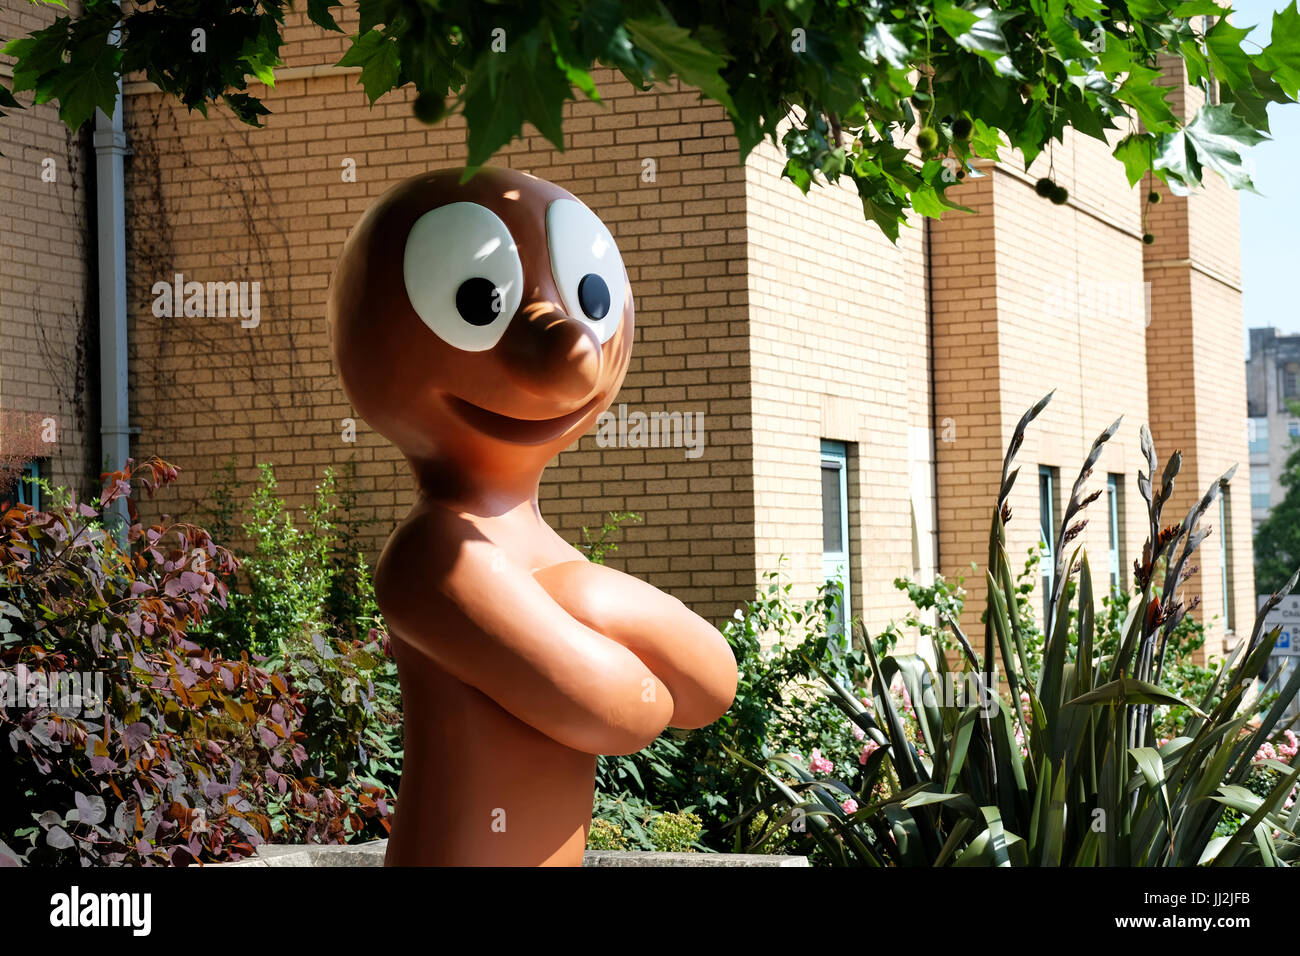 A large, life size sculpture of the Aardman Animation character, Morph, on display on a busy road in the center of Bristol England Stock Photo